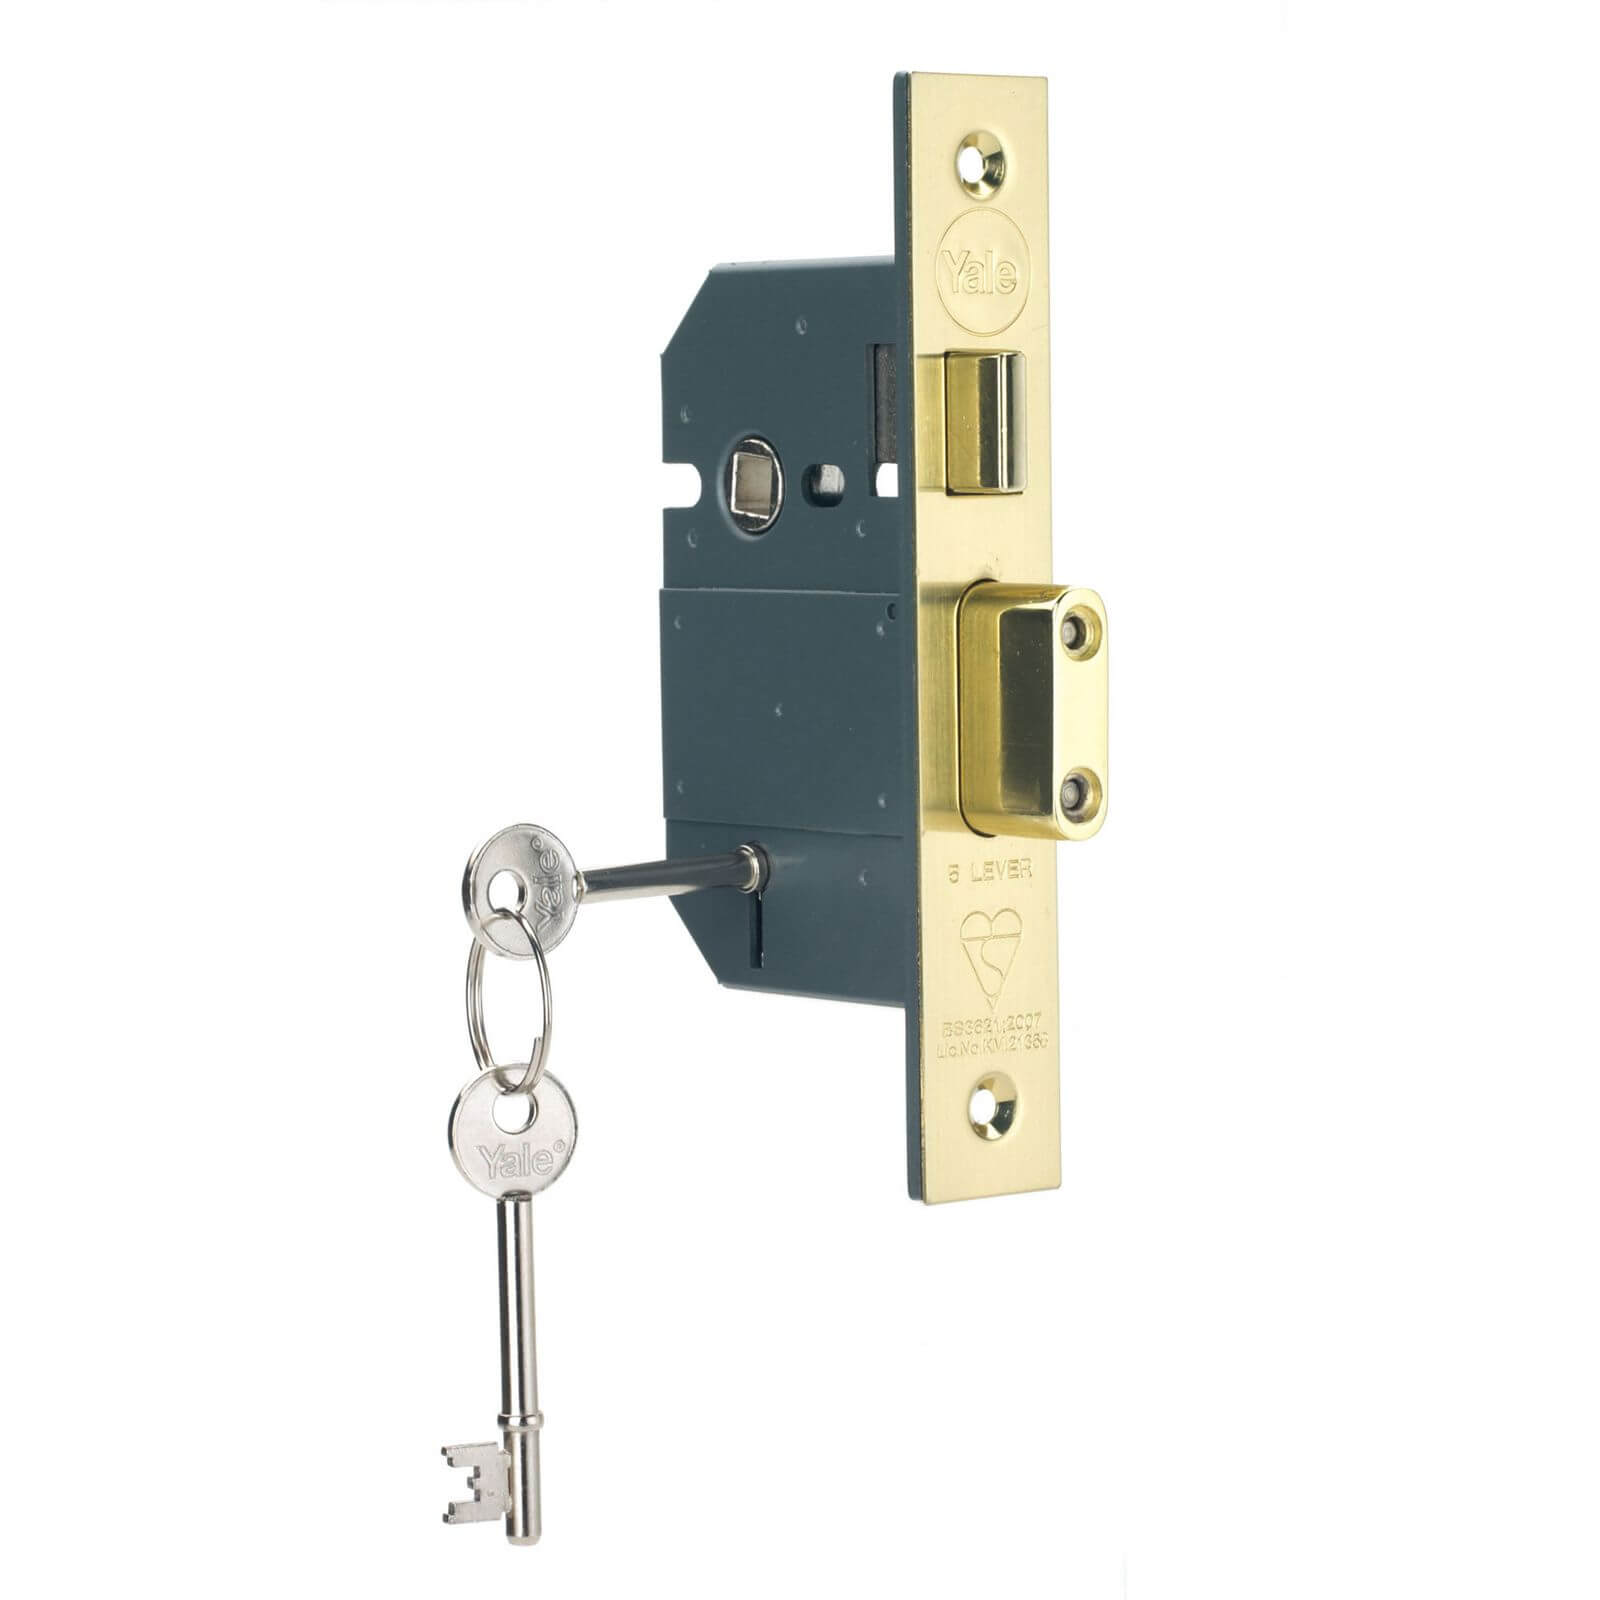 Yale PM560 British Standard BS3621 5 Lever 64mm - Brass